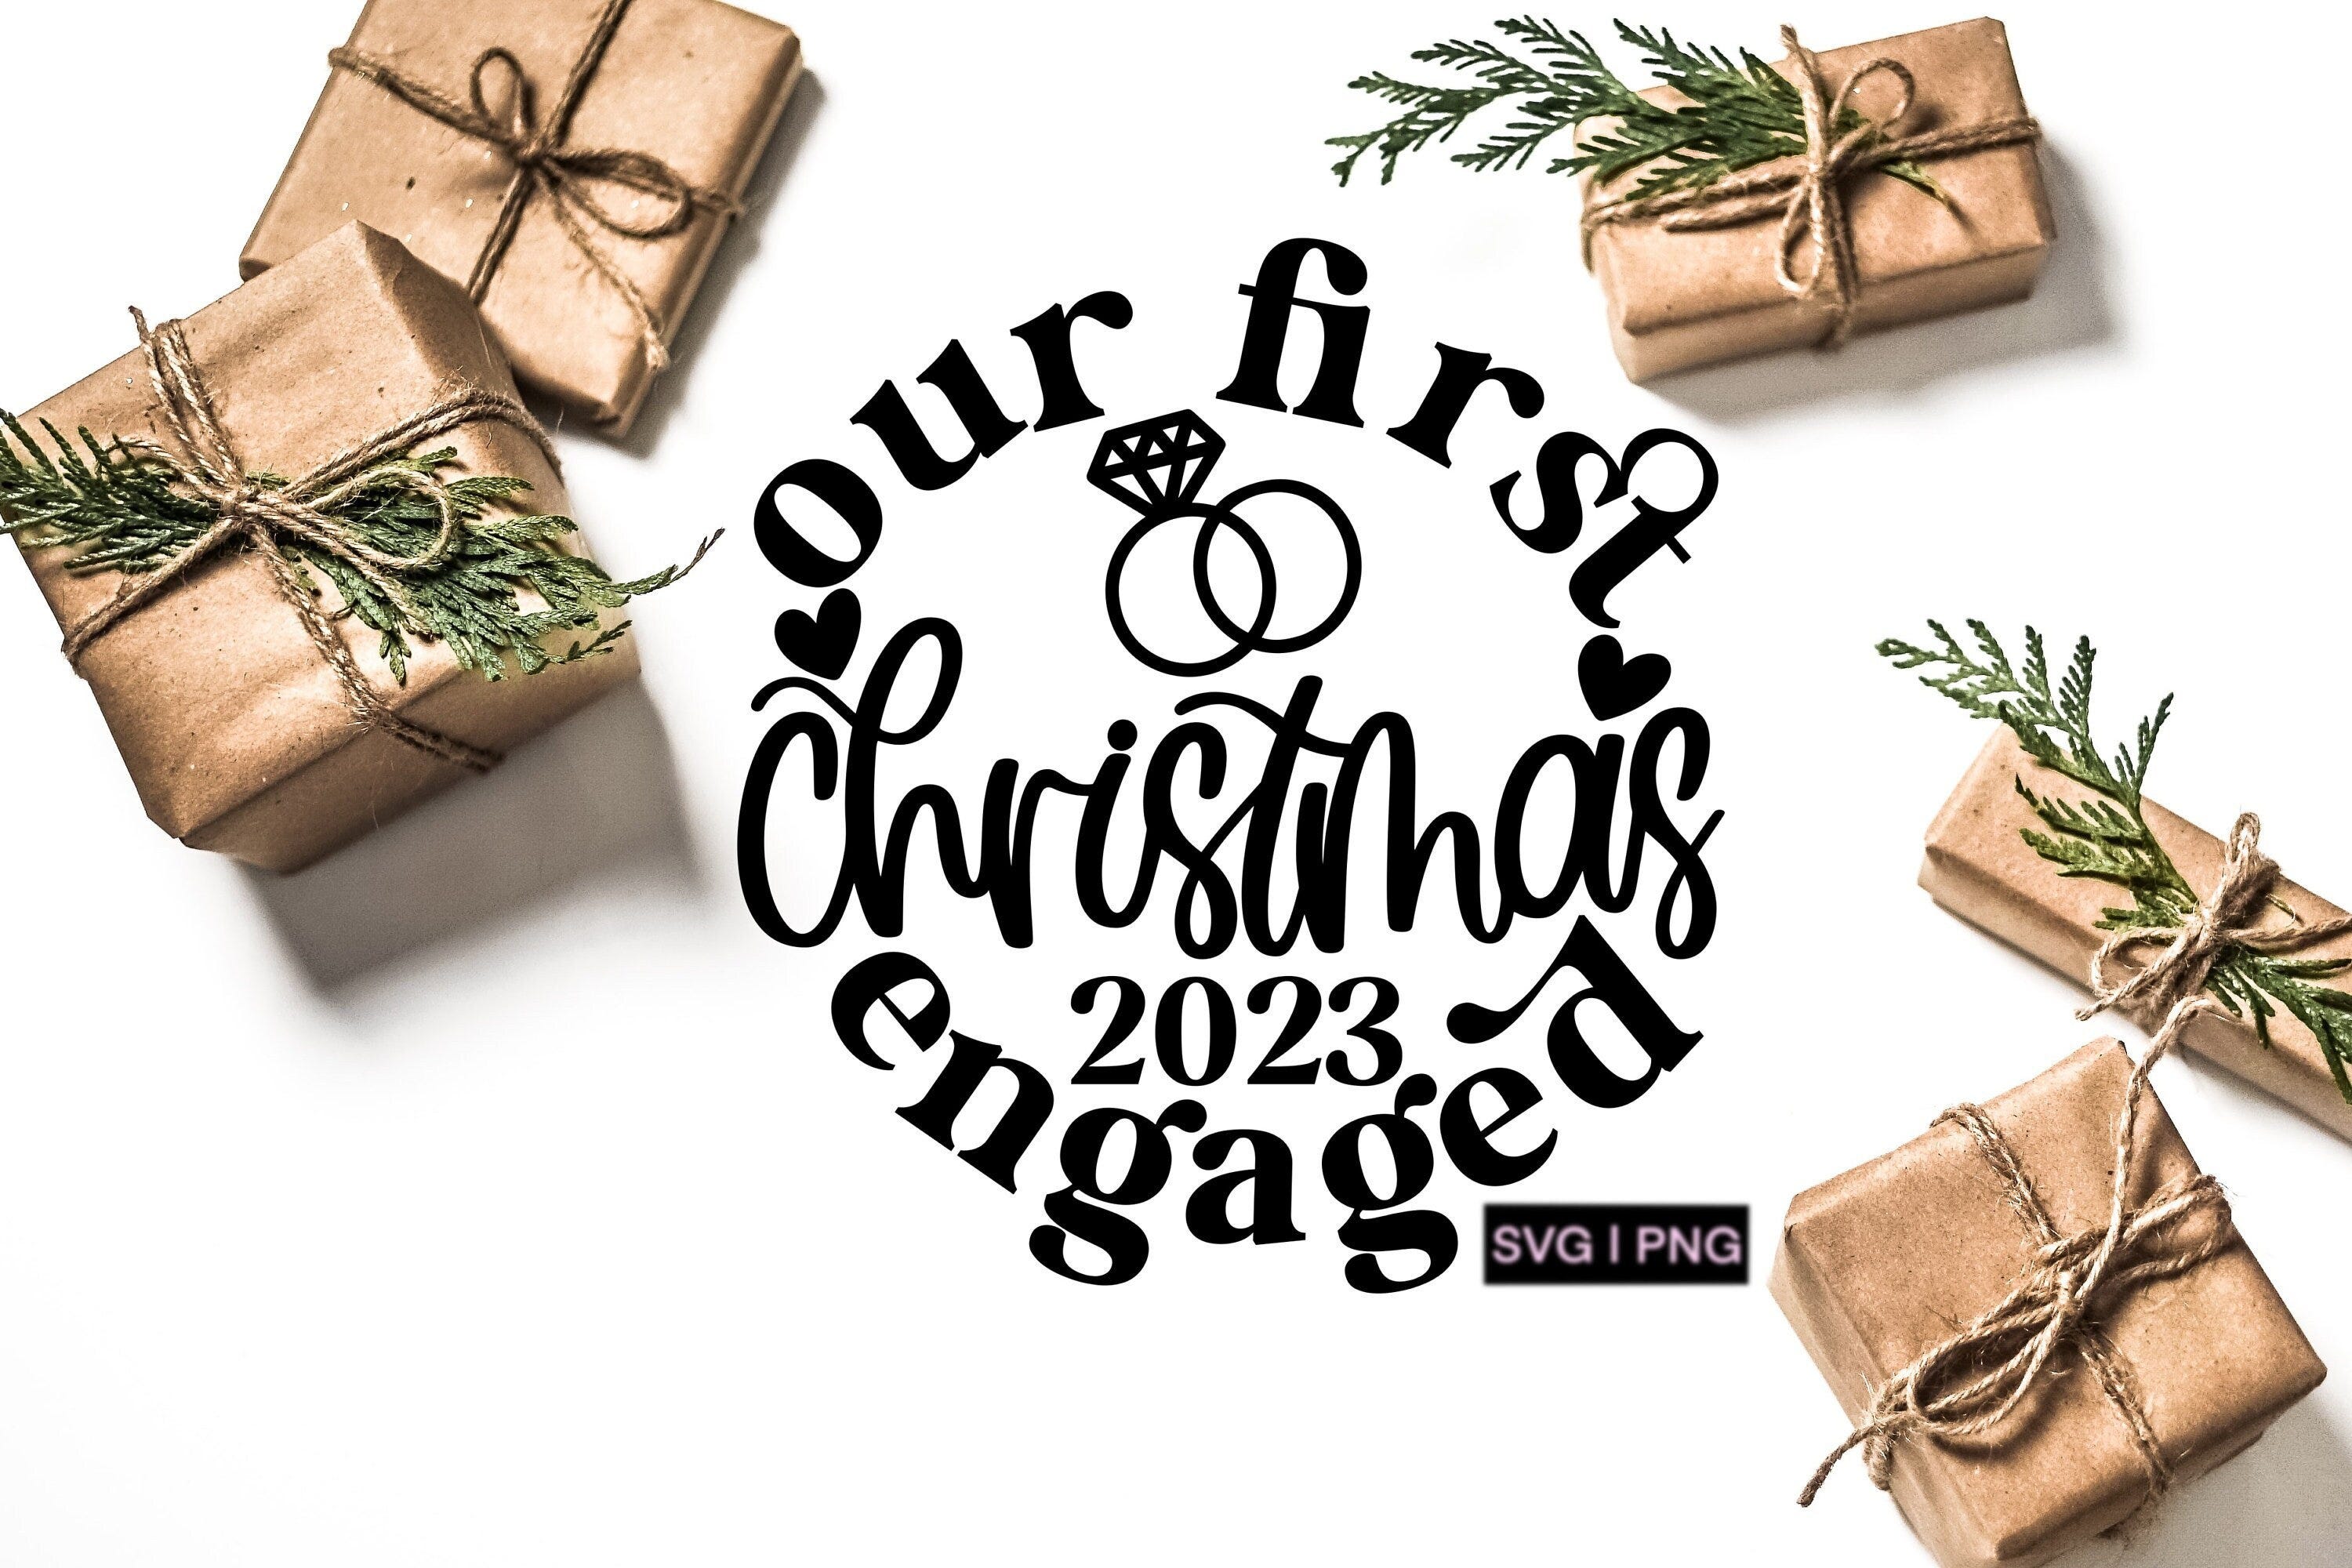 Our first Christmas engaged svg, Christmas 2023 svg, engaged christmas ornament svg, engaged 2023 svg, 2023 christmas ornament svg, xmas svg